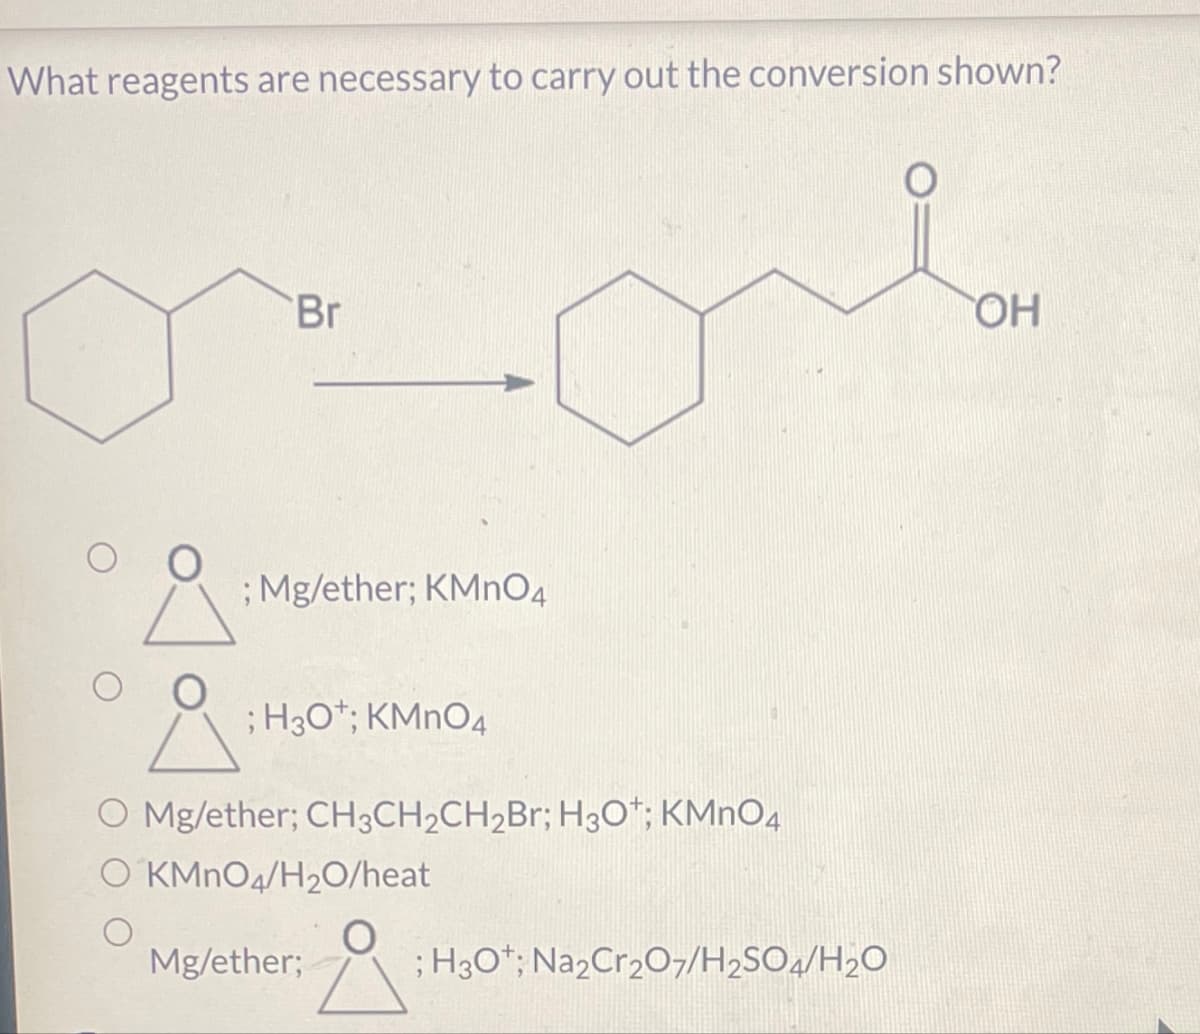 What reagents are necessary to carry out the conversion shown?
Br
O
; Mg/ether; KMnO4
; H3O+; KMnO4
O Mg/ether; CH3CH2CH2Br; H3O+; KMnO4
O KMnO4/H20/heat
Mg/ether;
; H3O+; Na2Cr2O7/H2SO4/H2O
OH